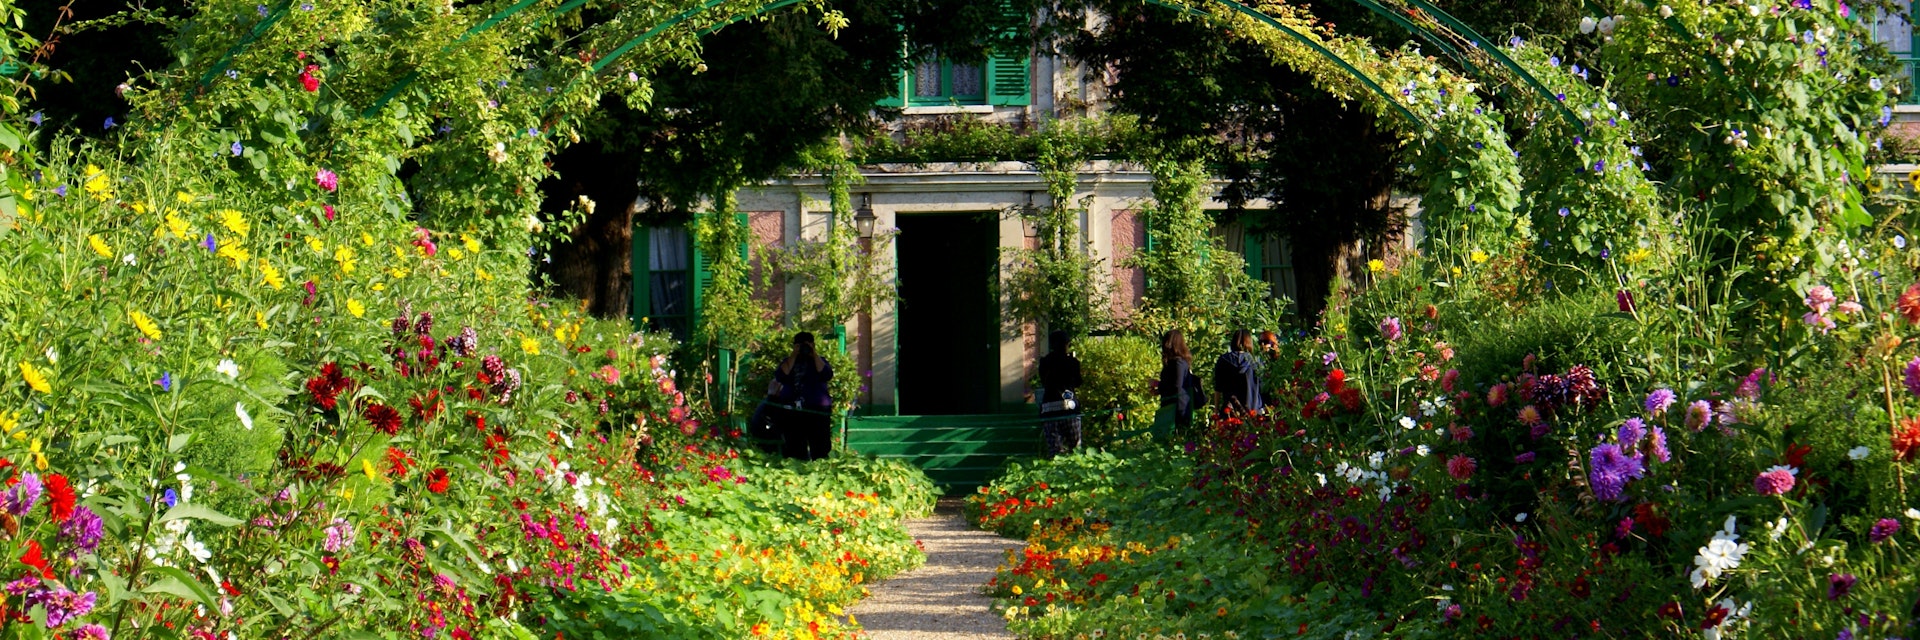 A green archway with flowers at Claude Monet's garden at Giverny.